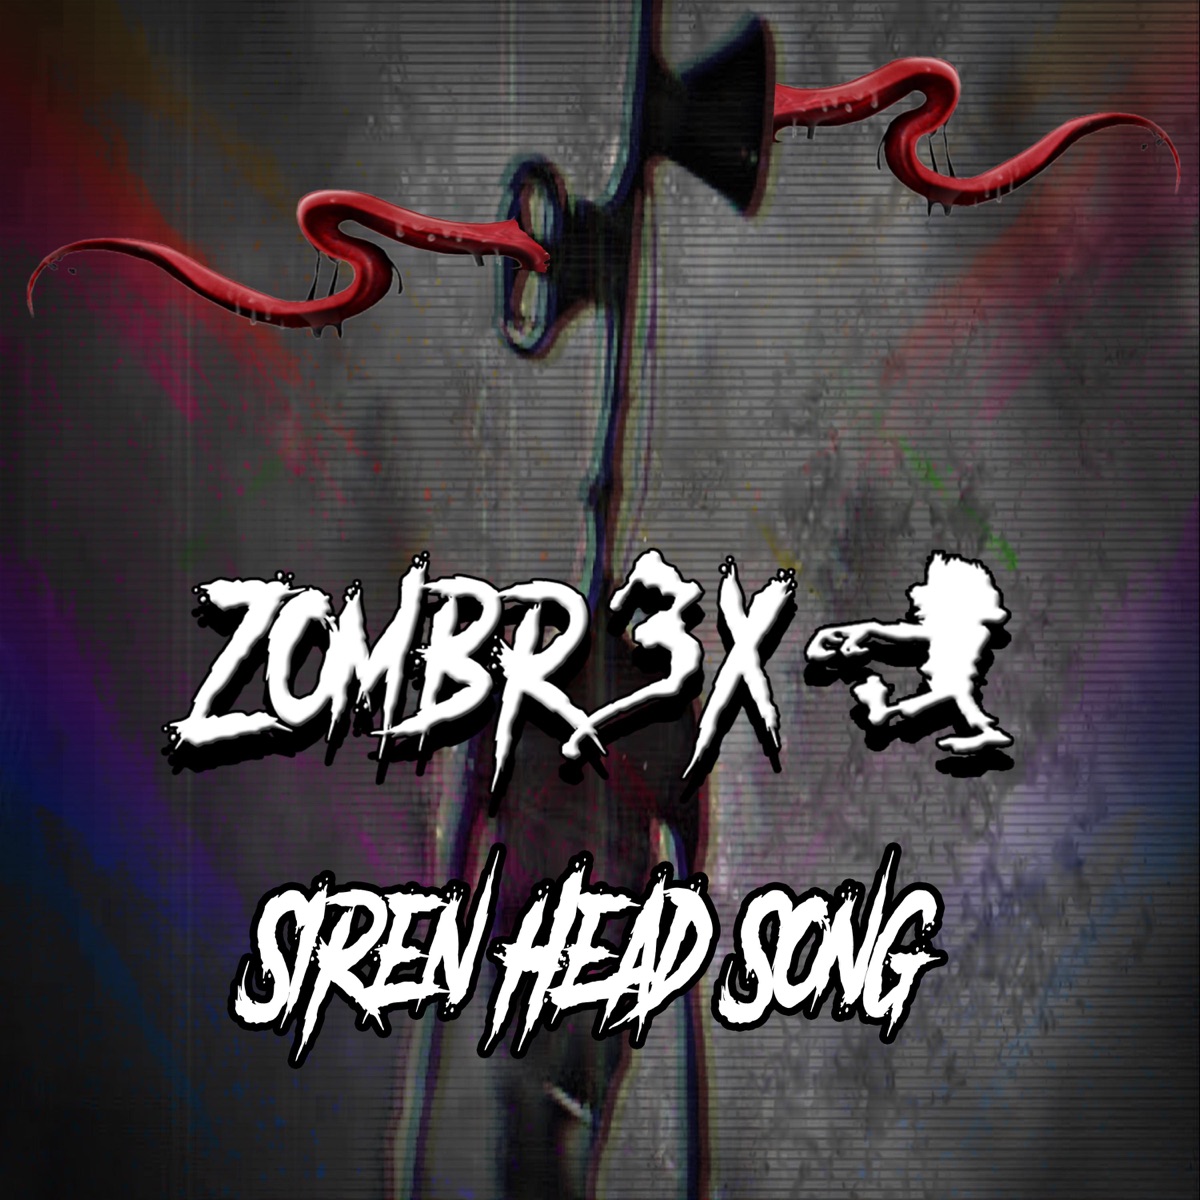  DR. LIVESEY PHONK (REMIX) : Zombr3x, Phonk Music Now and Trap  Music Now: Digital Music